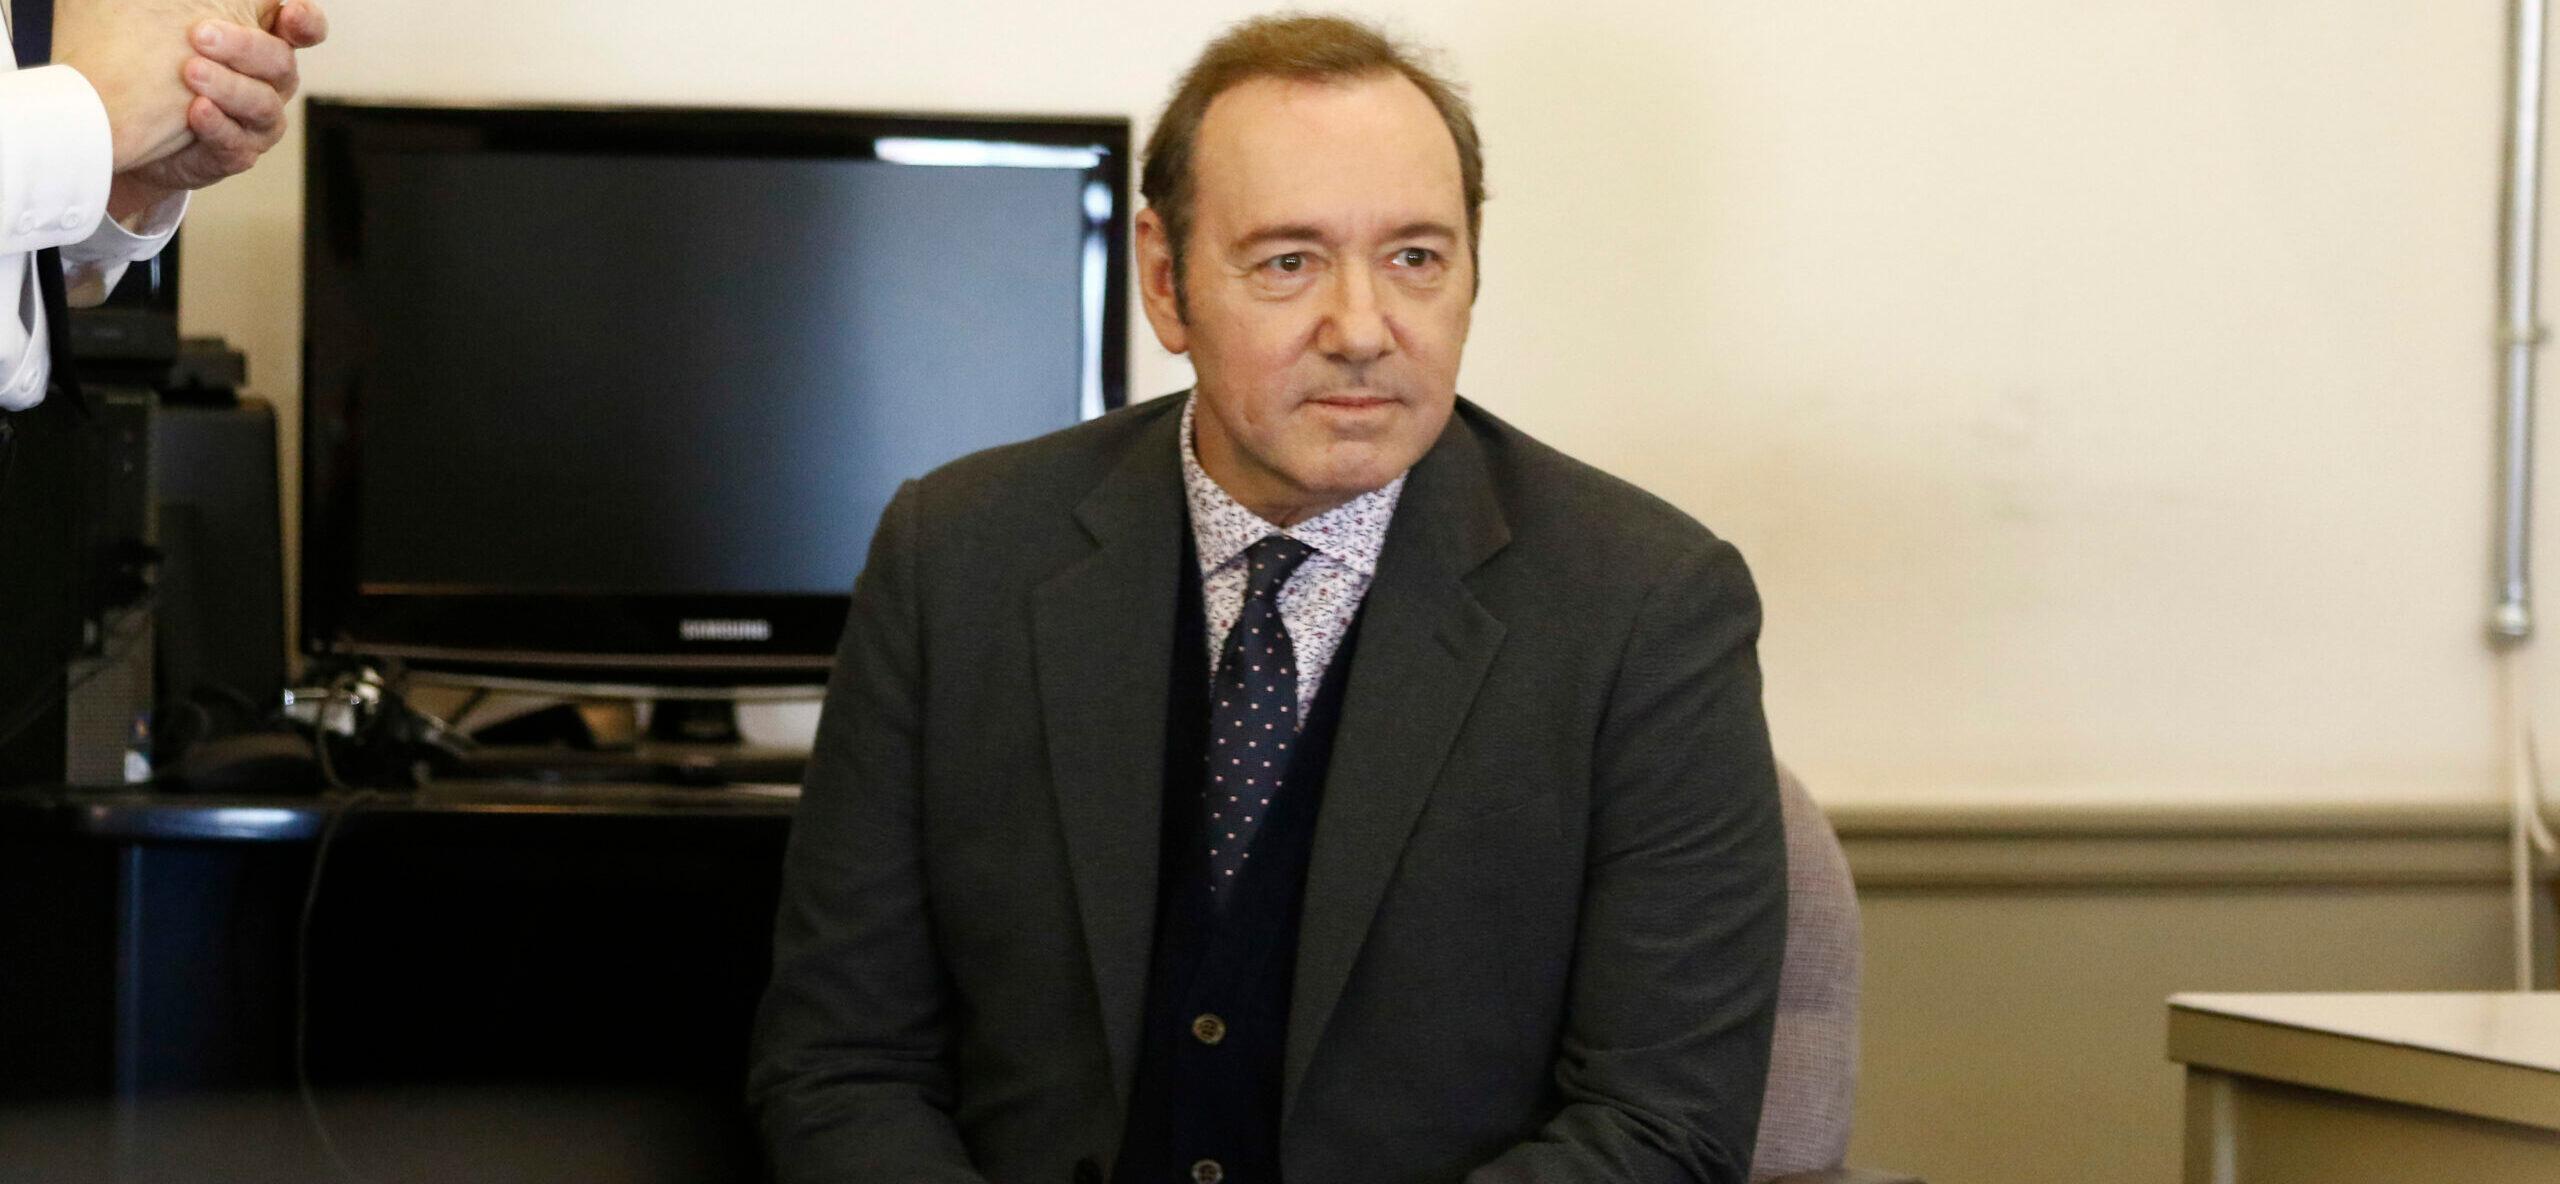 Kevin Spacey appears in court for arraignment